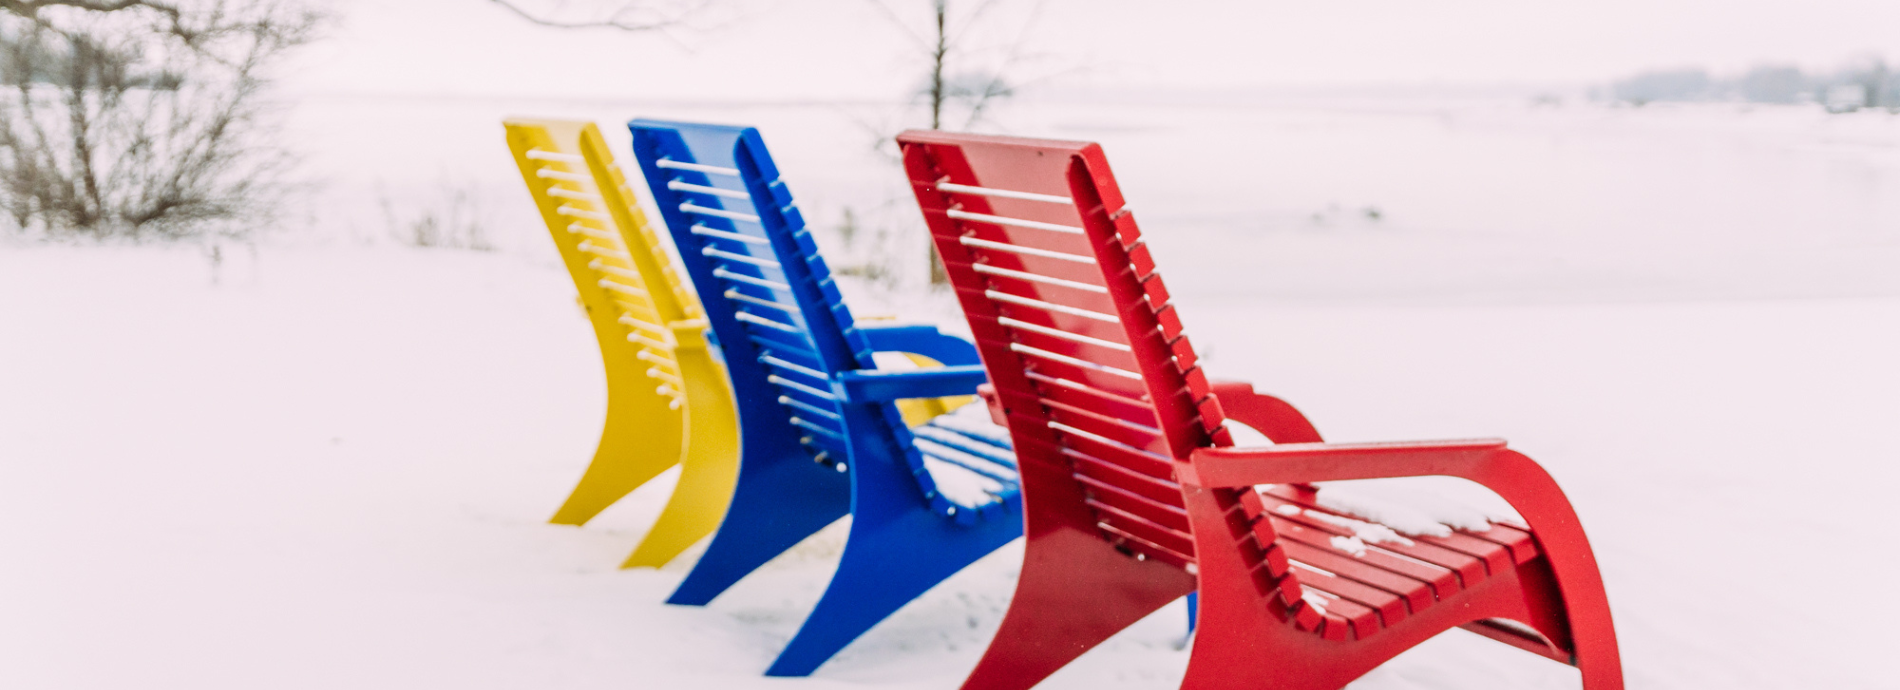 chairs at Washago Centennial Park coverered in snow